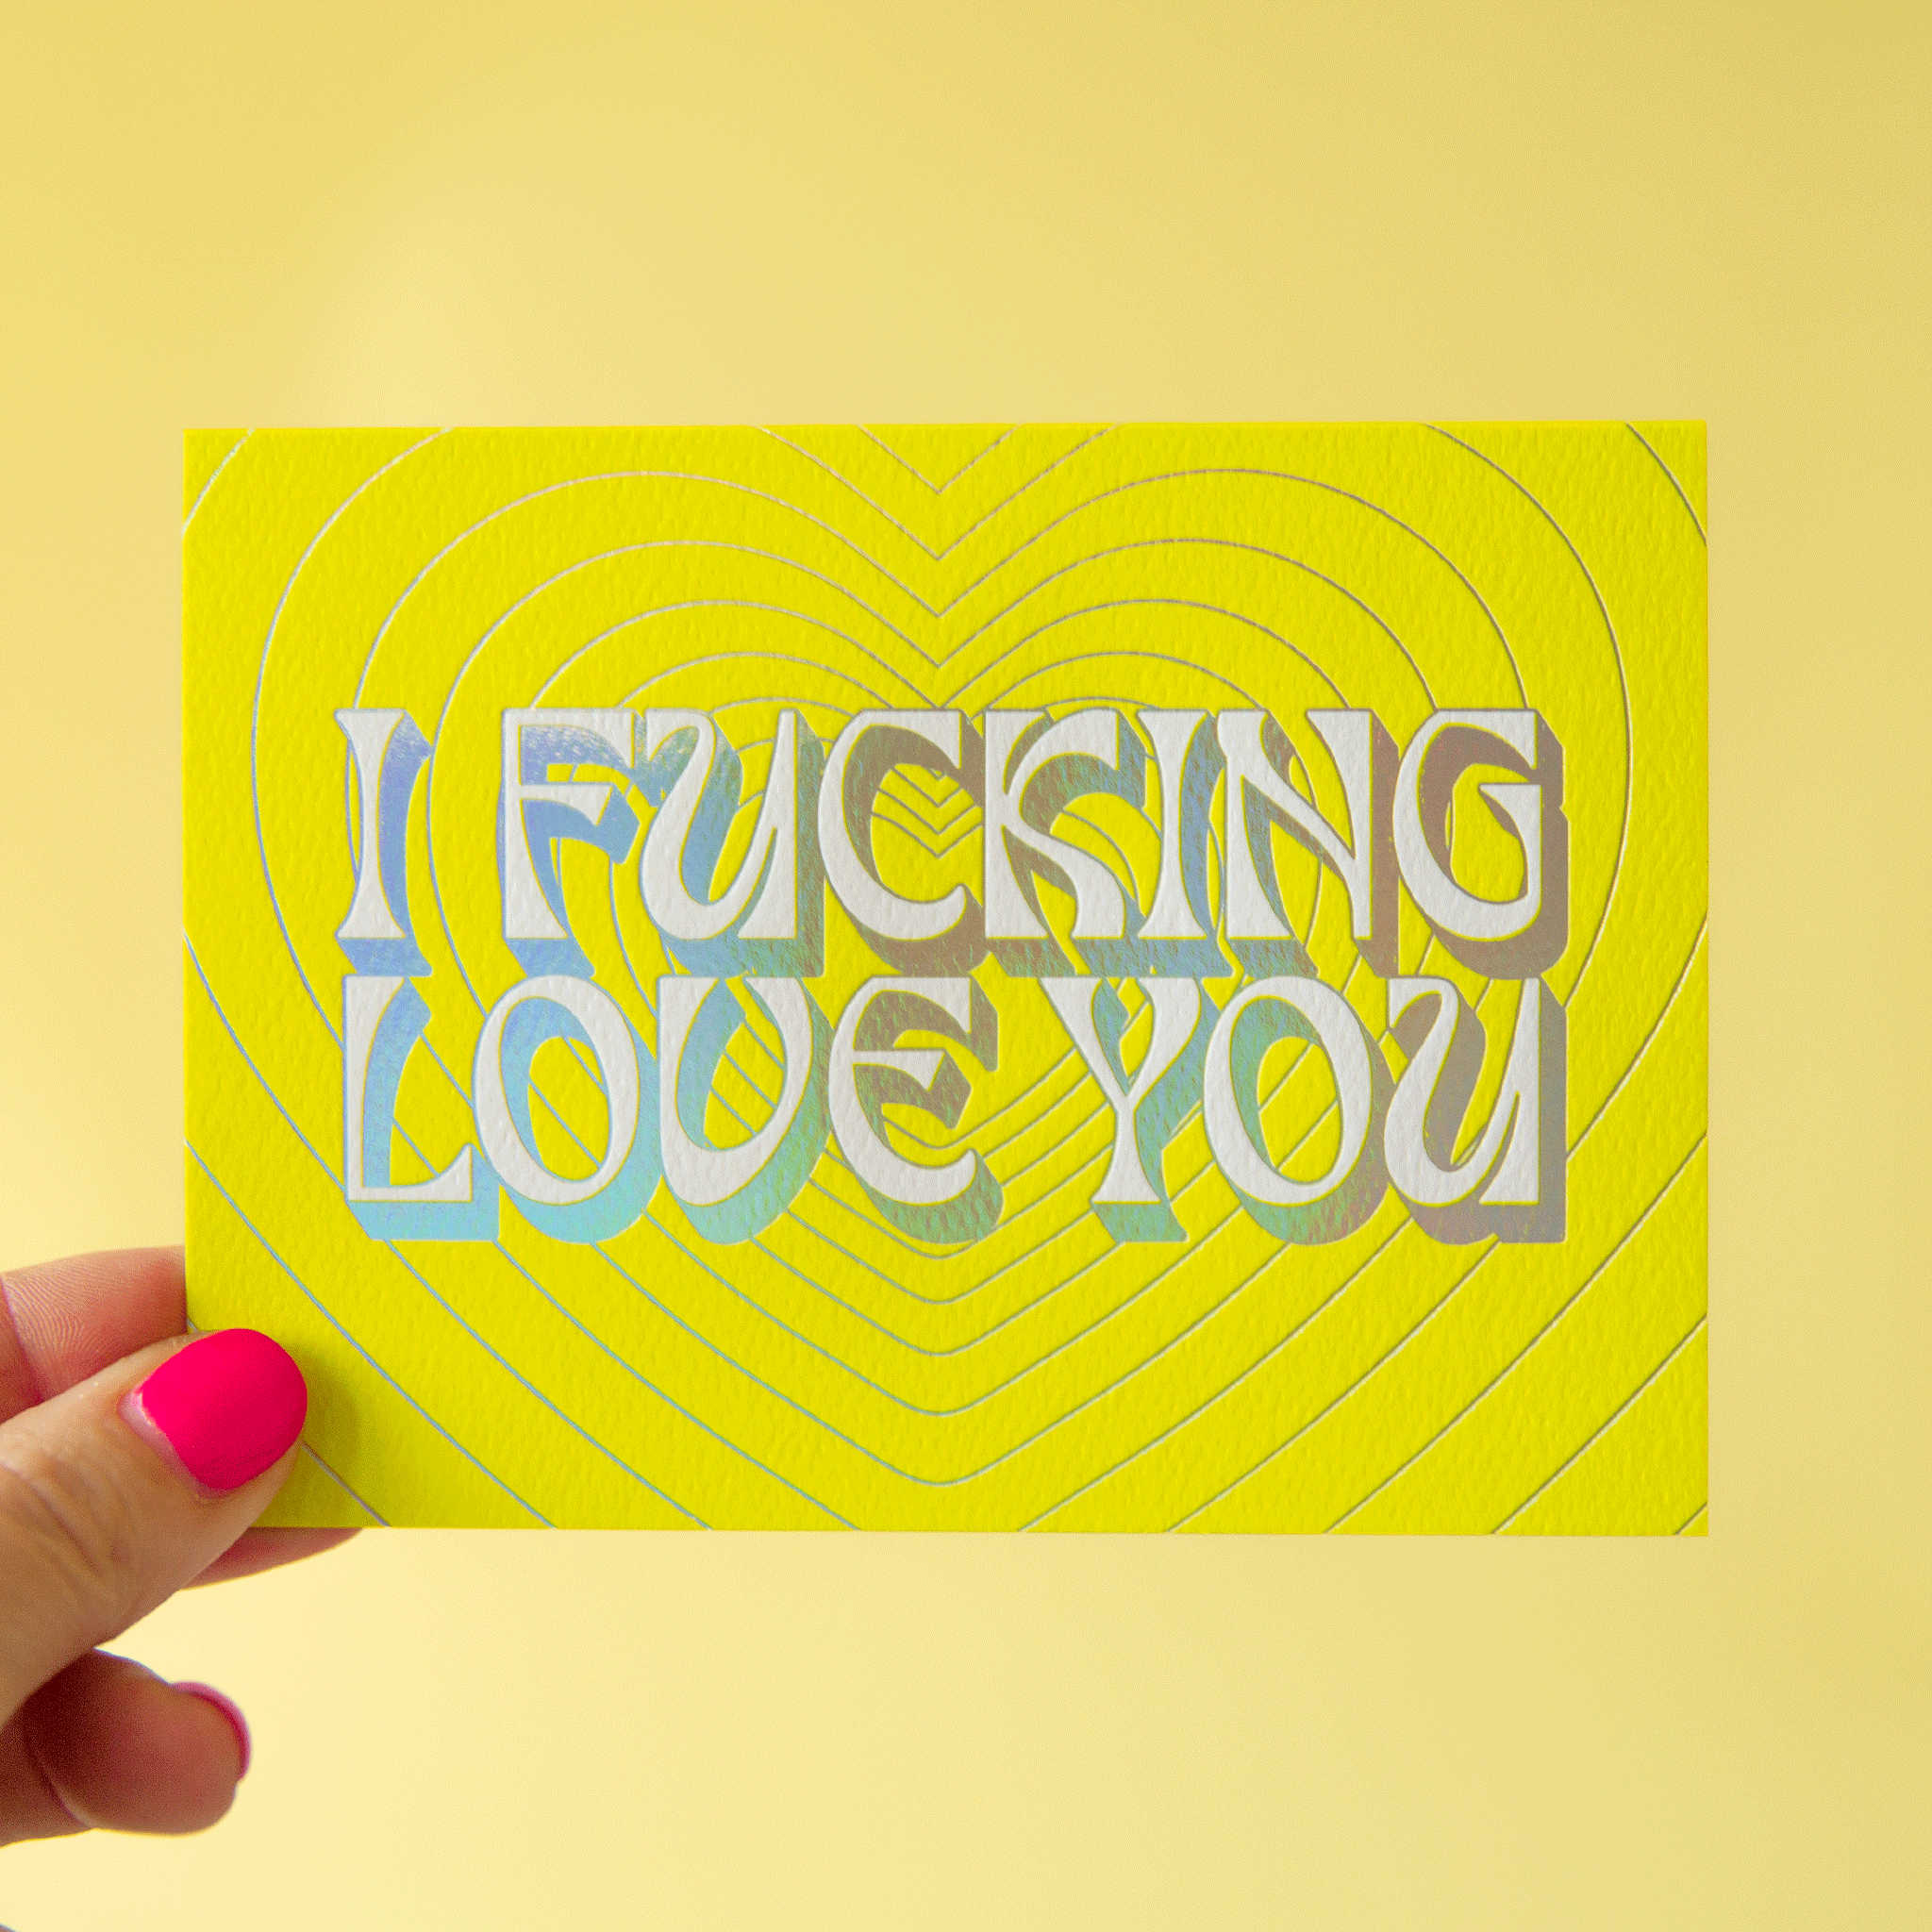 On a lime green background is a lime green card with silver heart shapes and text in the center that reads, "I Fucking Love You".